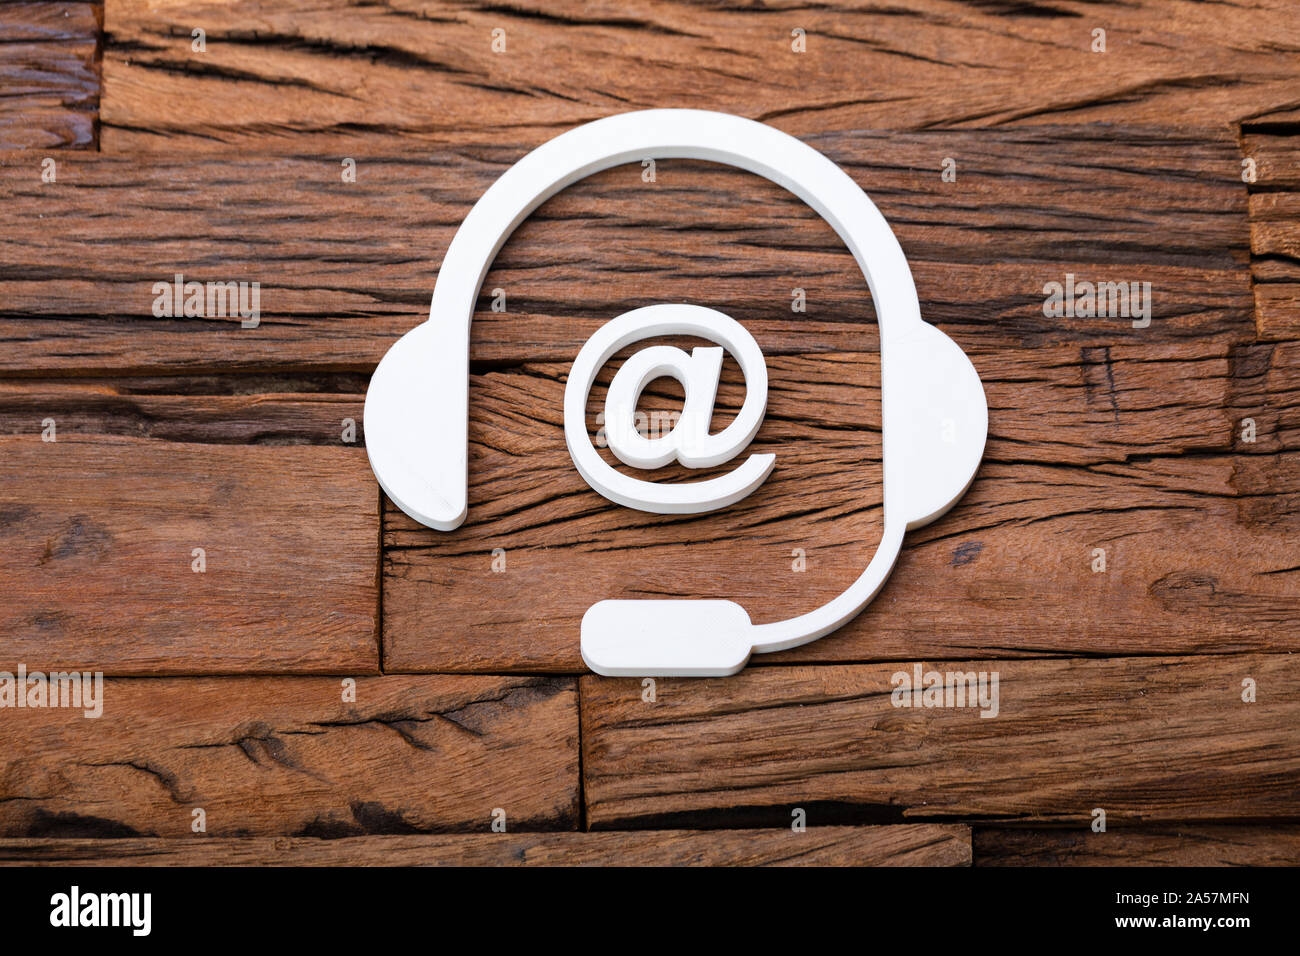 Online  Customer Support Concept On Wooden Desk Stock Photo